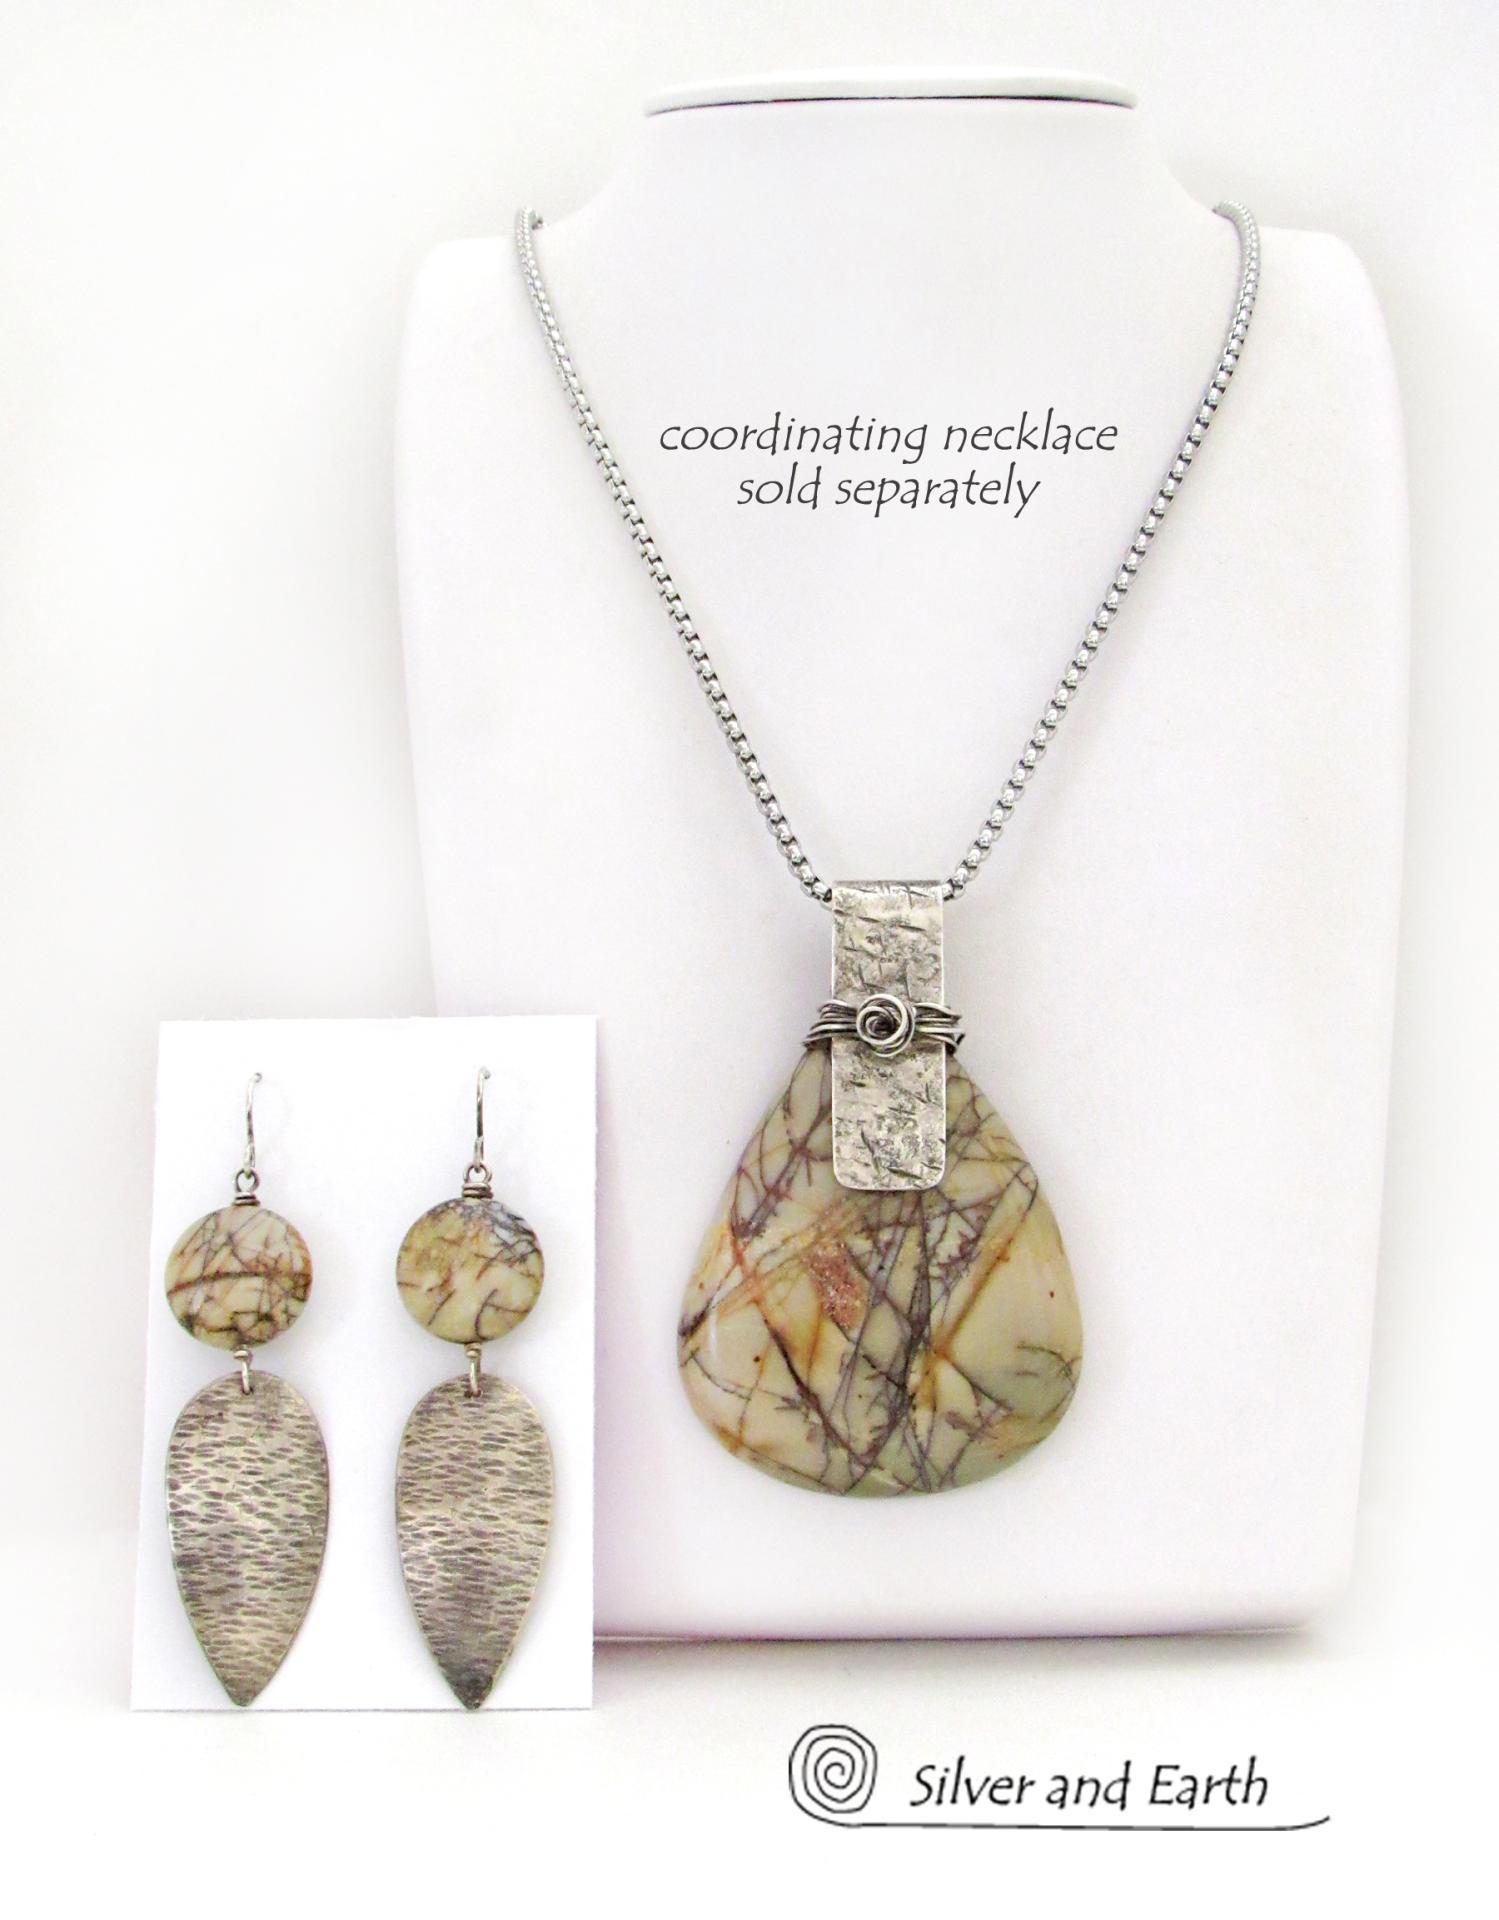 Long Textured Sterling Silver Dangle Earrings with Natural Picasso Jasper Stones with Matching Necklace